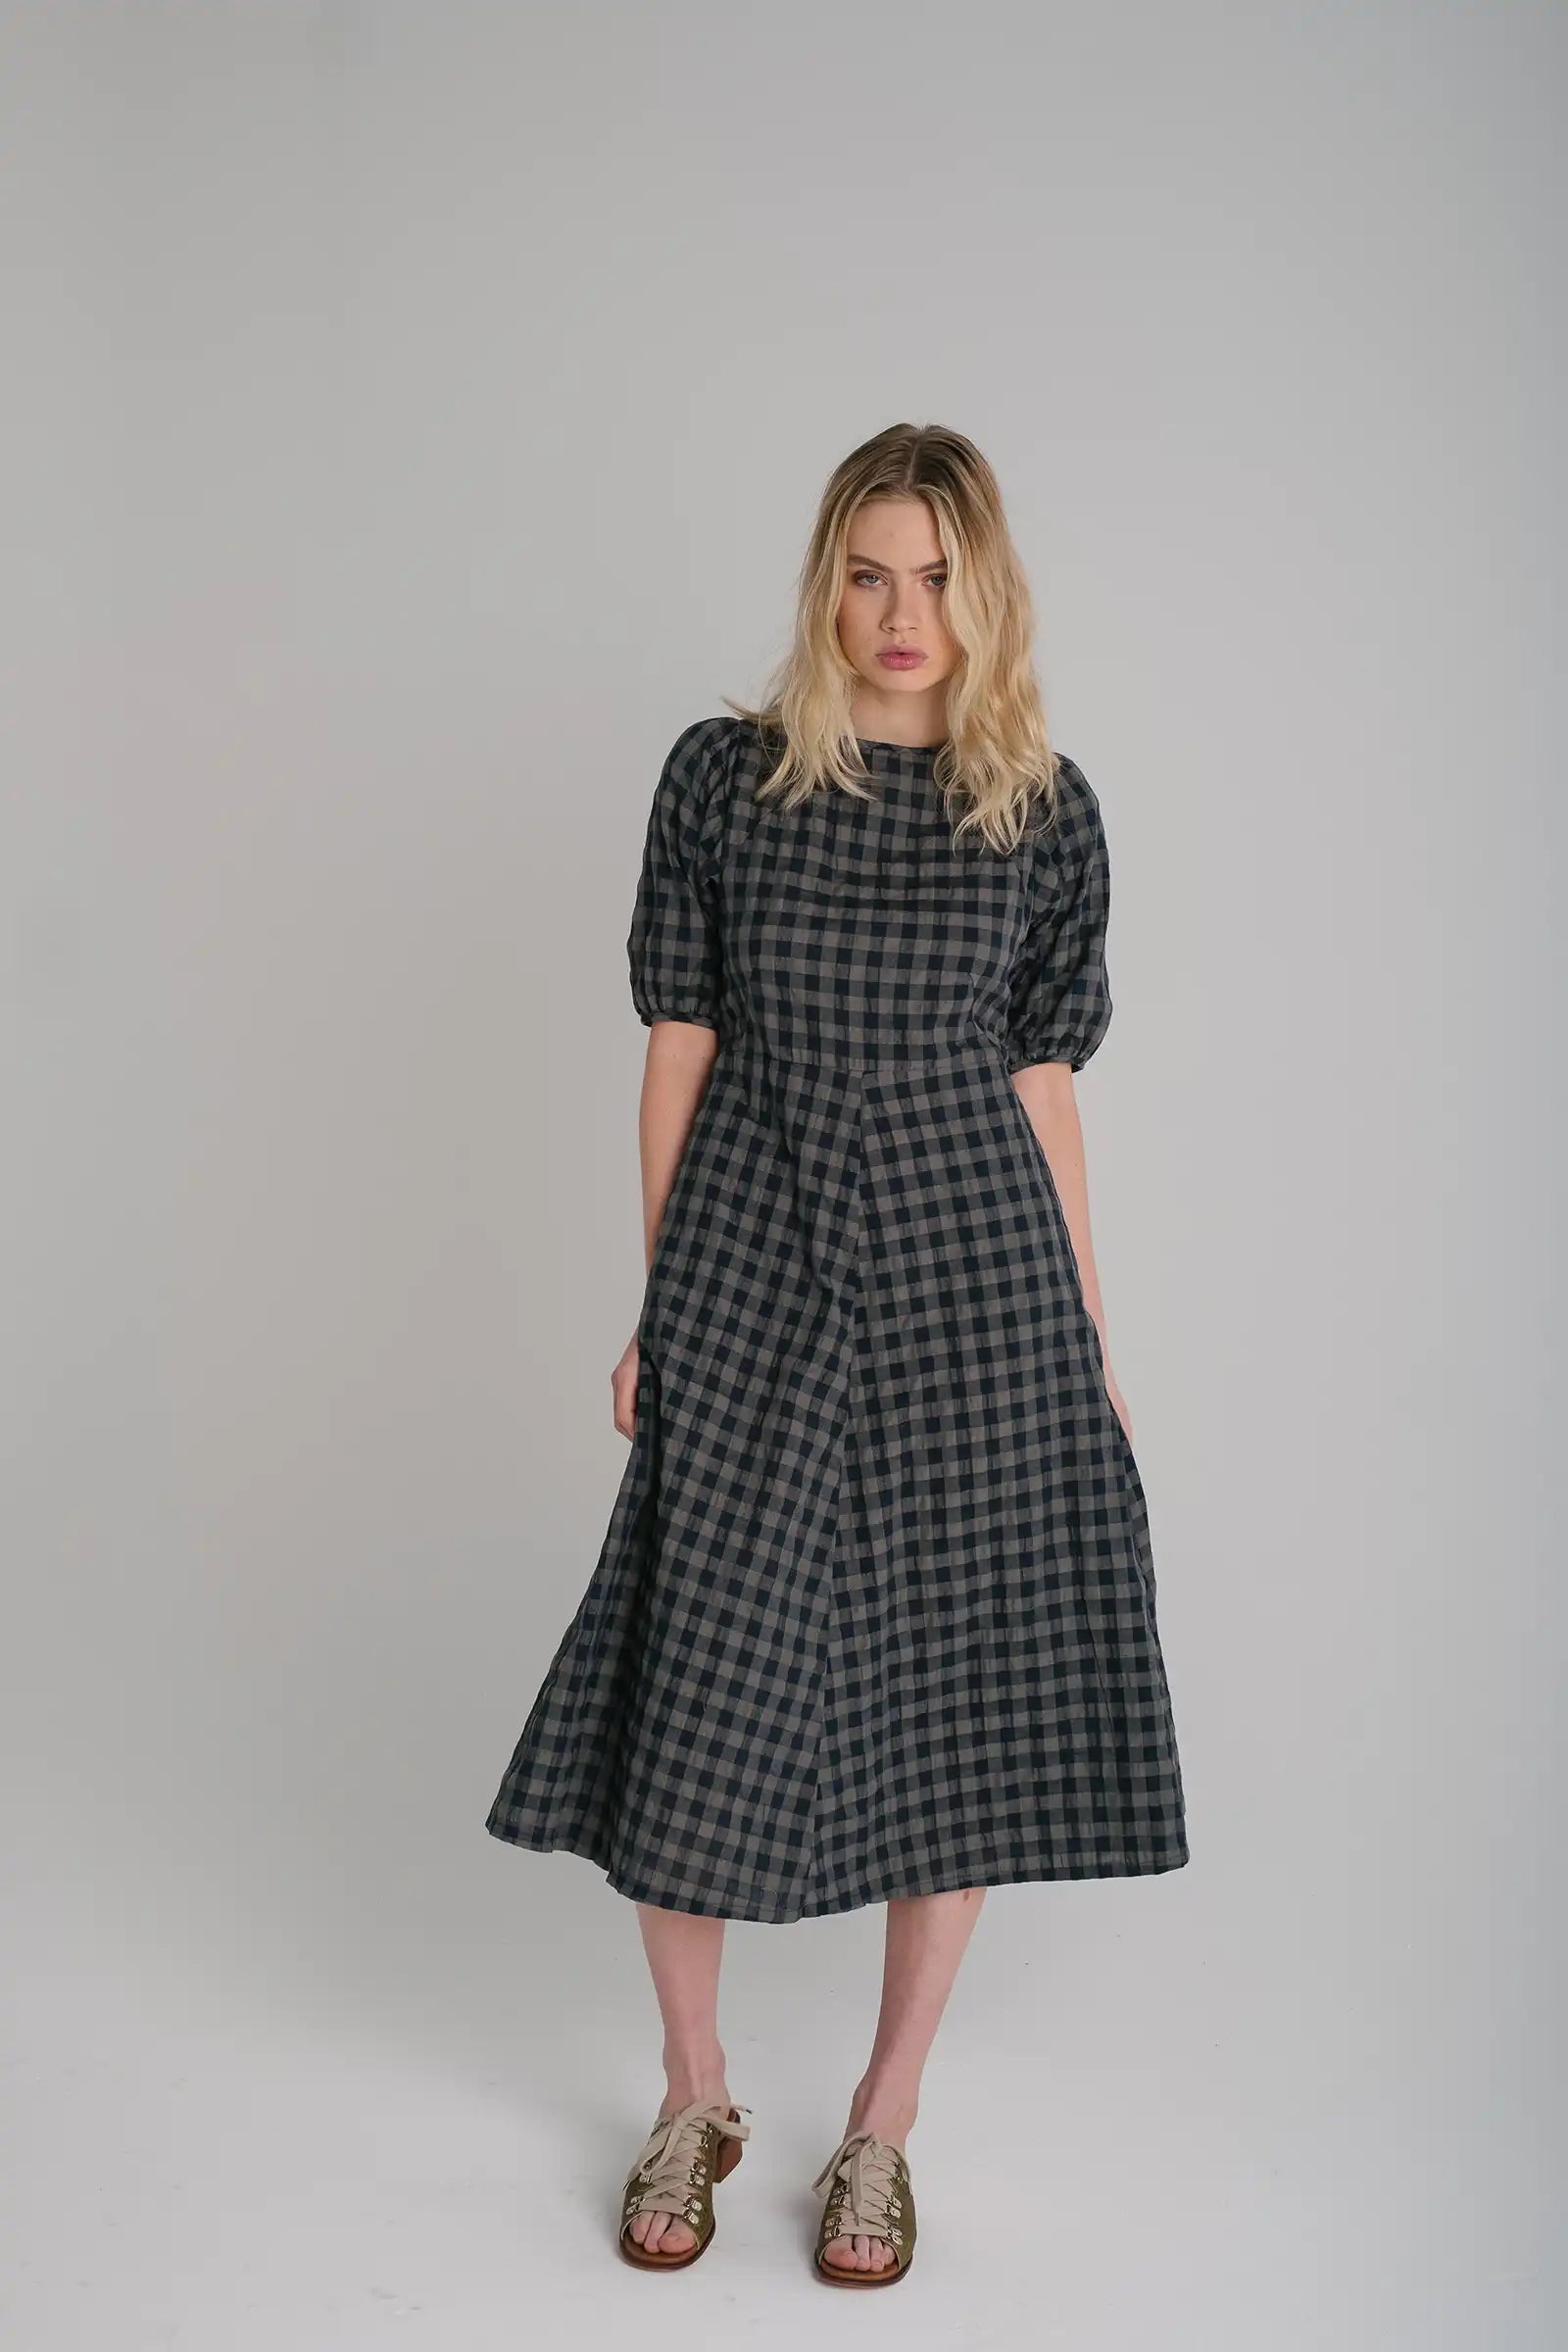 Gingham Seersucker A-Line Dress in Mocha and Black Cotton Check